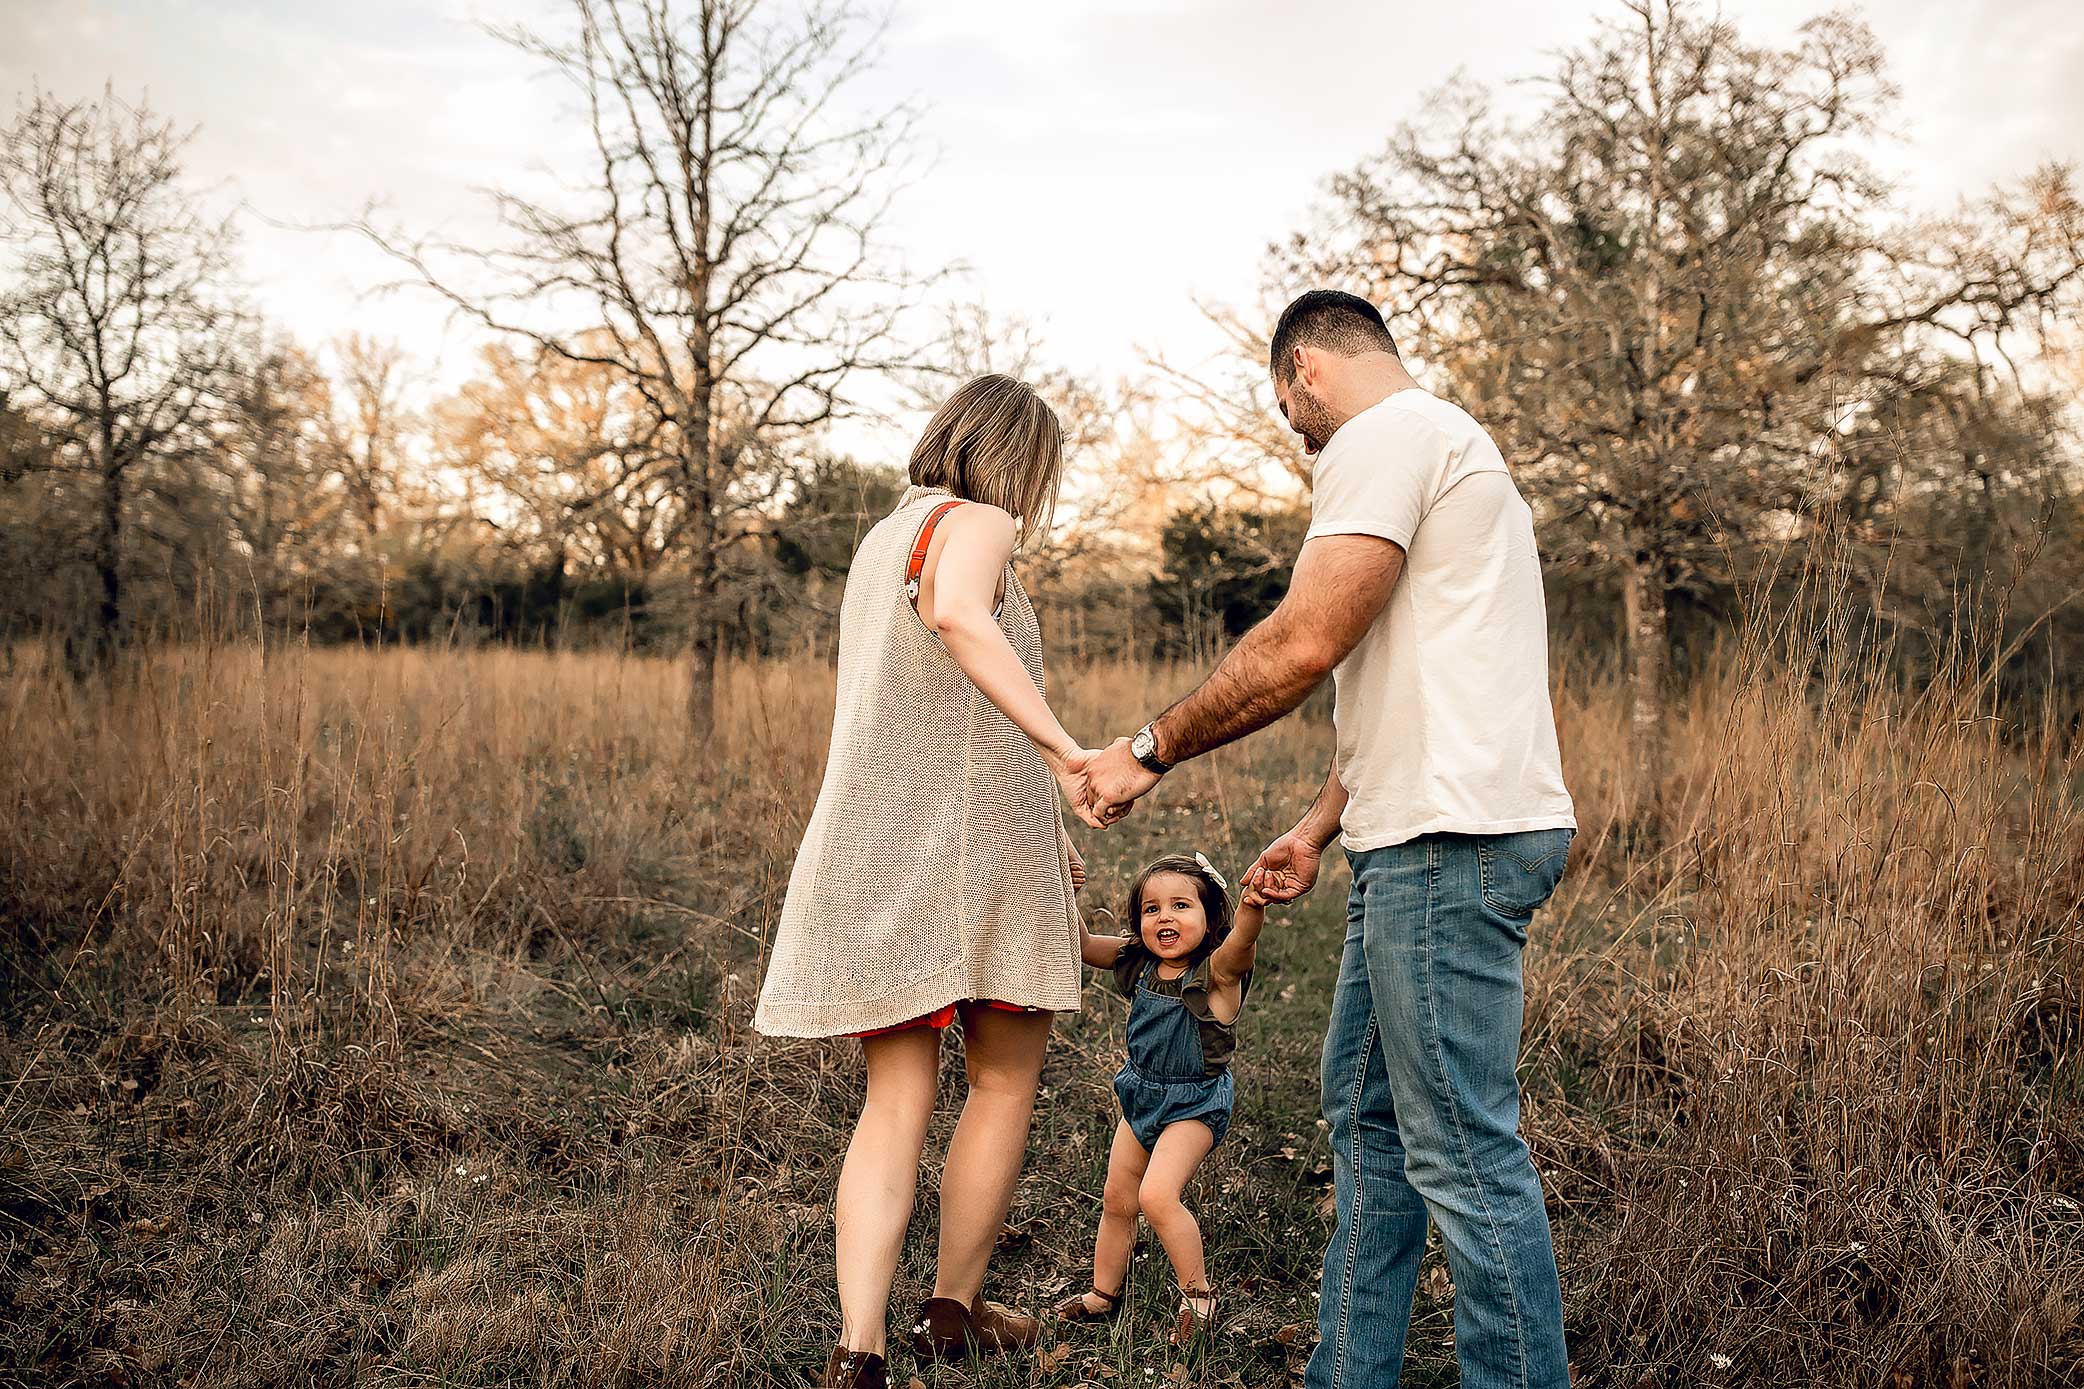 shelby-schiller-photography-sunset-family-pictures-spring-2019-49.jpg